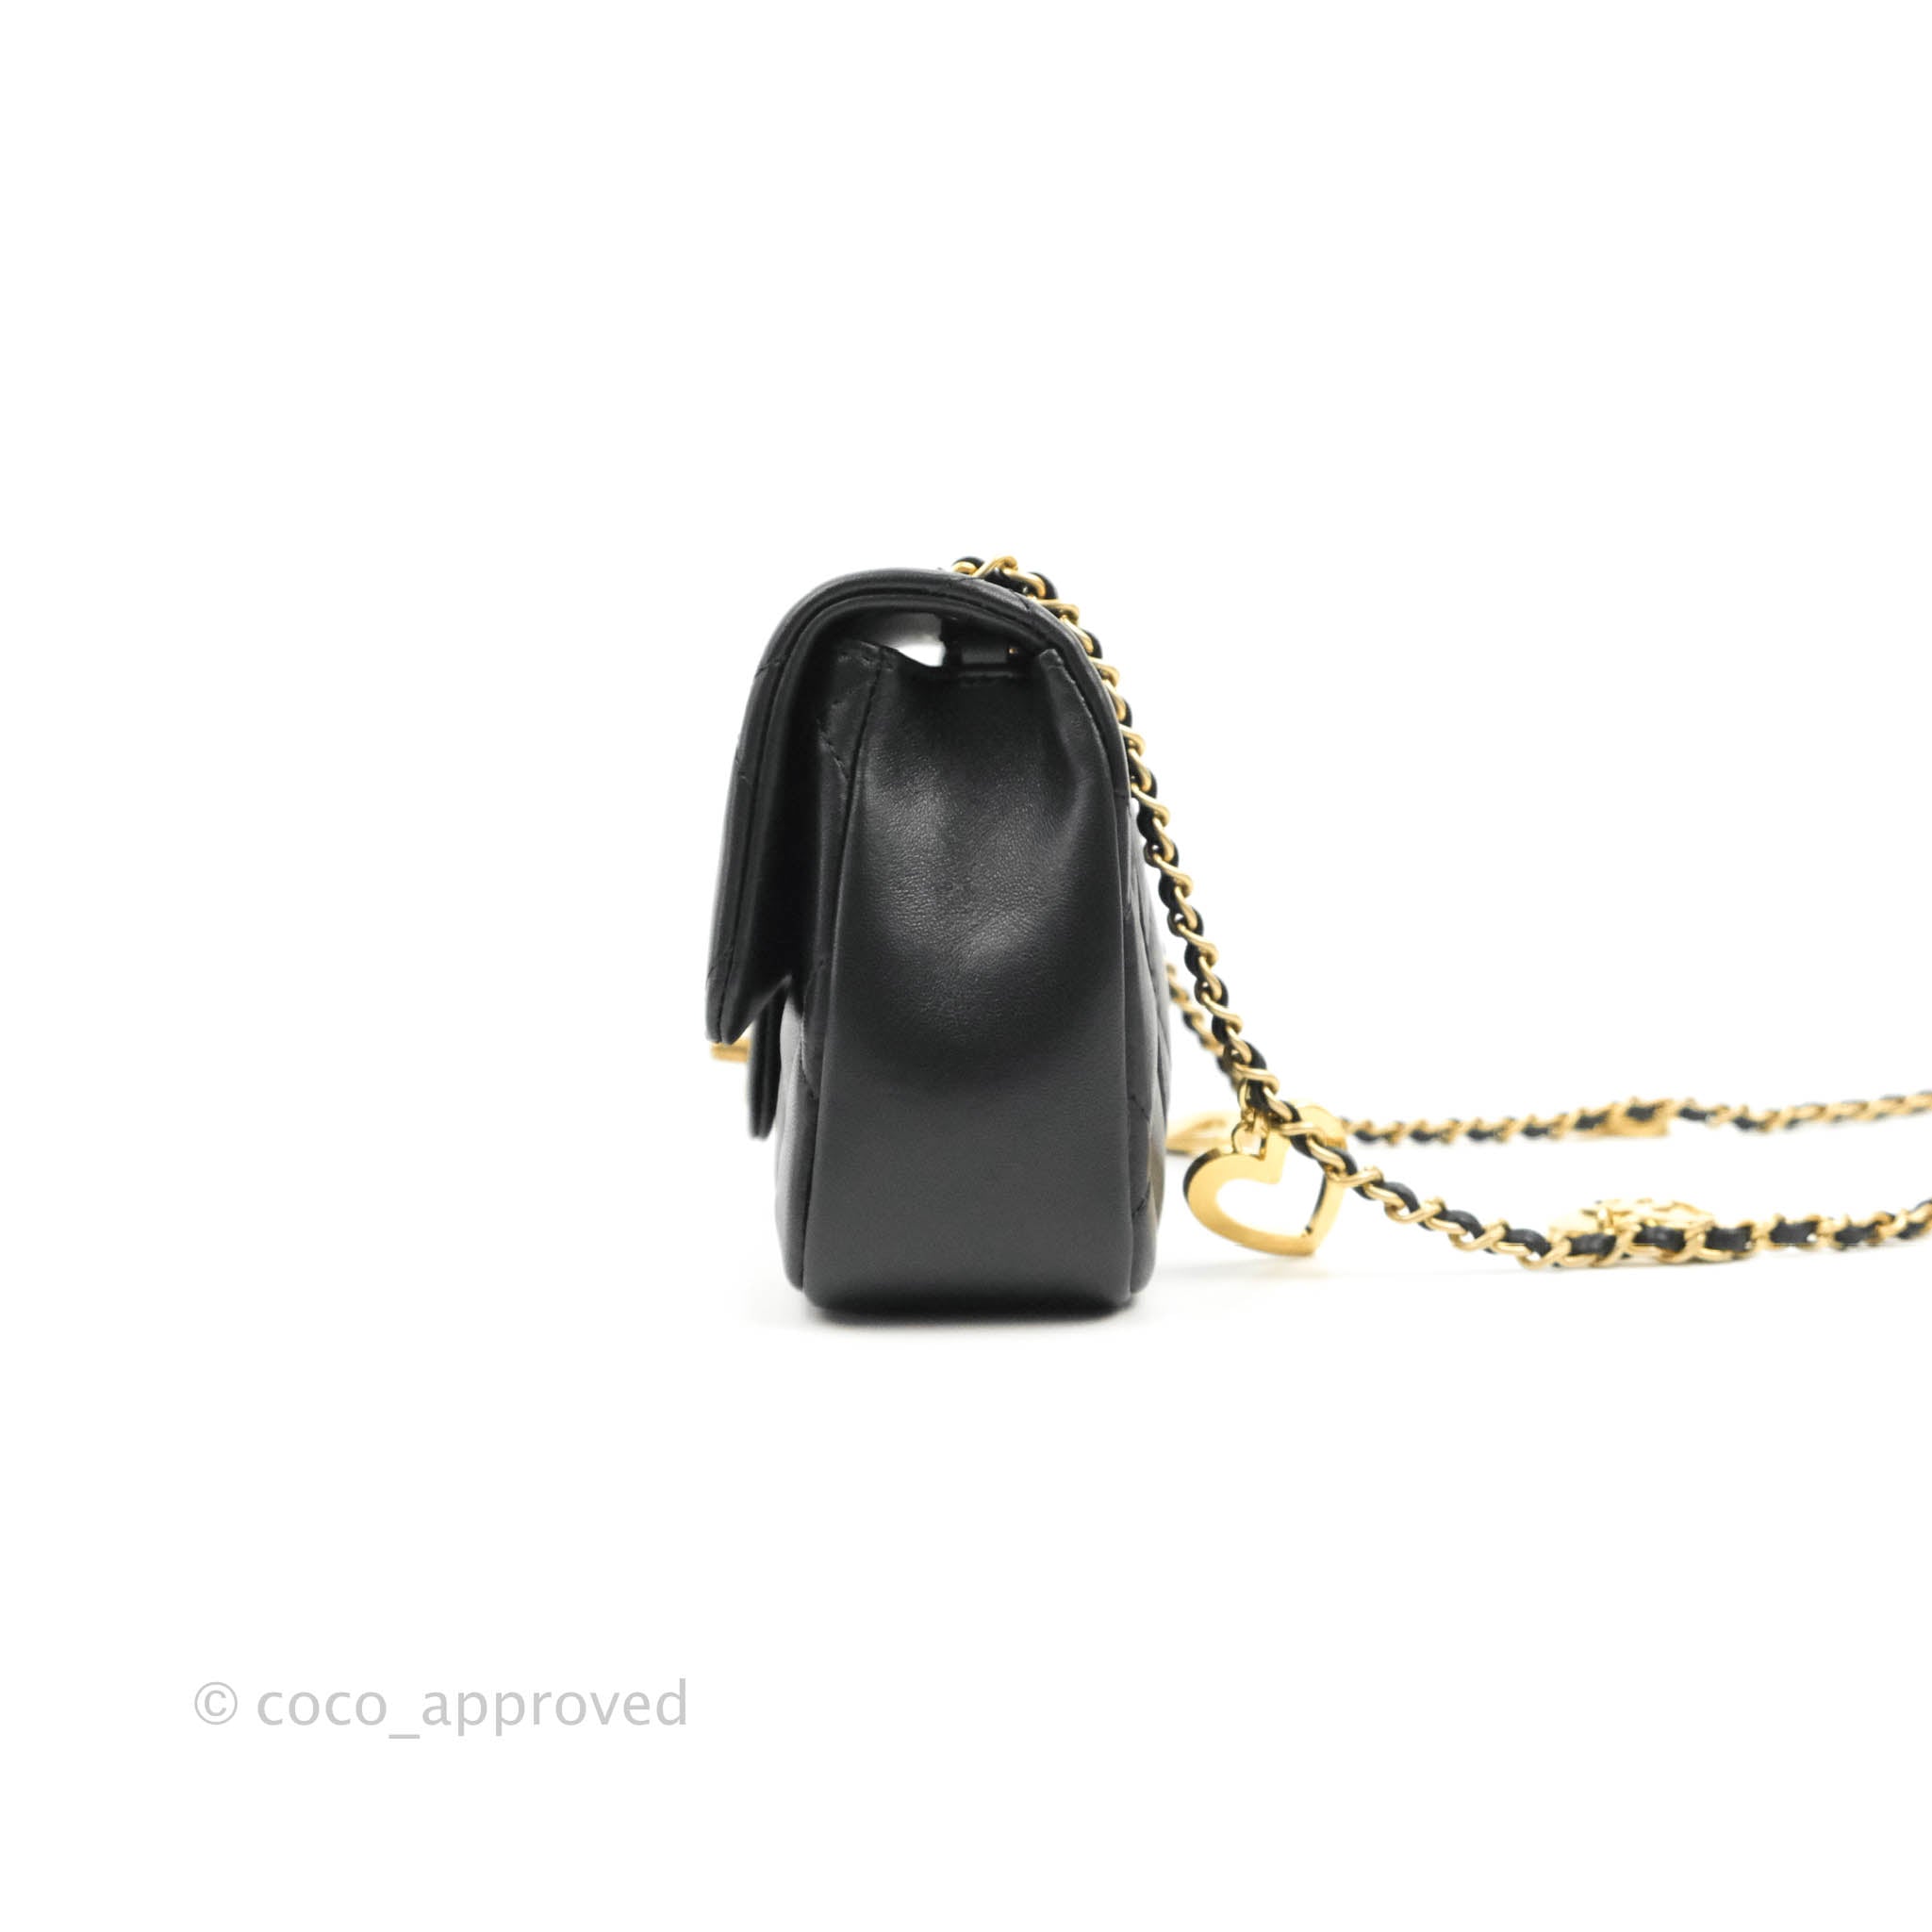 Chanel Black Choco Quilted Satin Extra Mini Lipstick Charm Bag Chanel